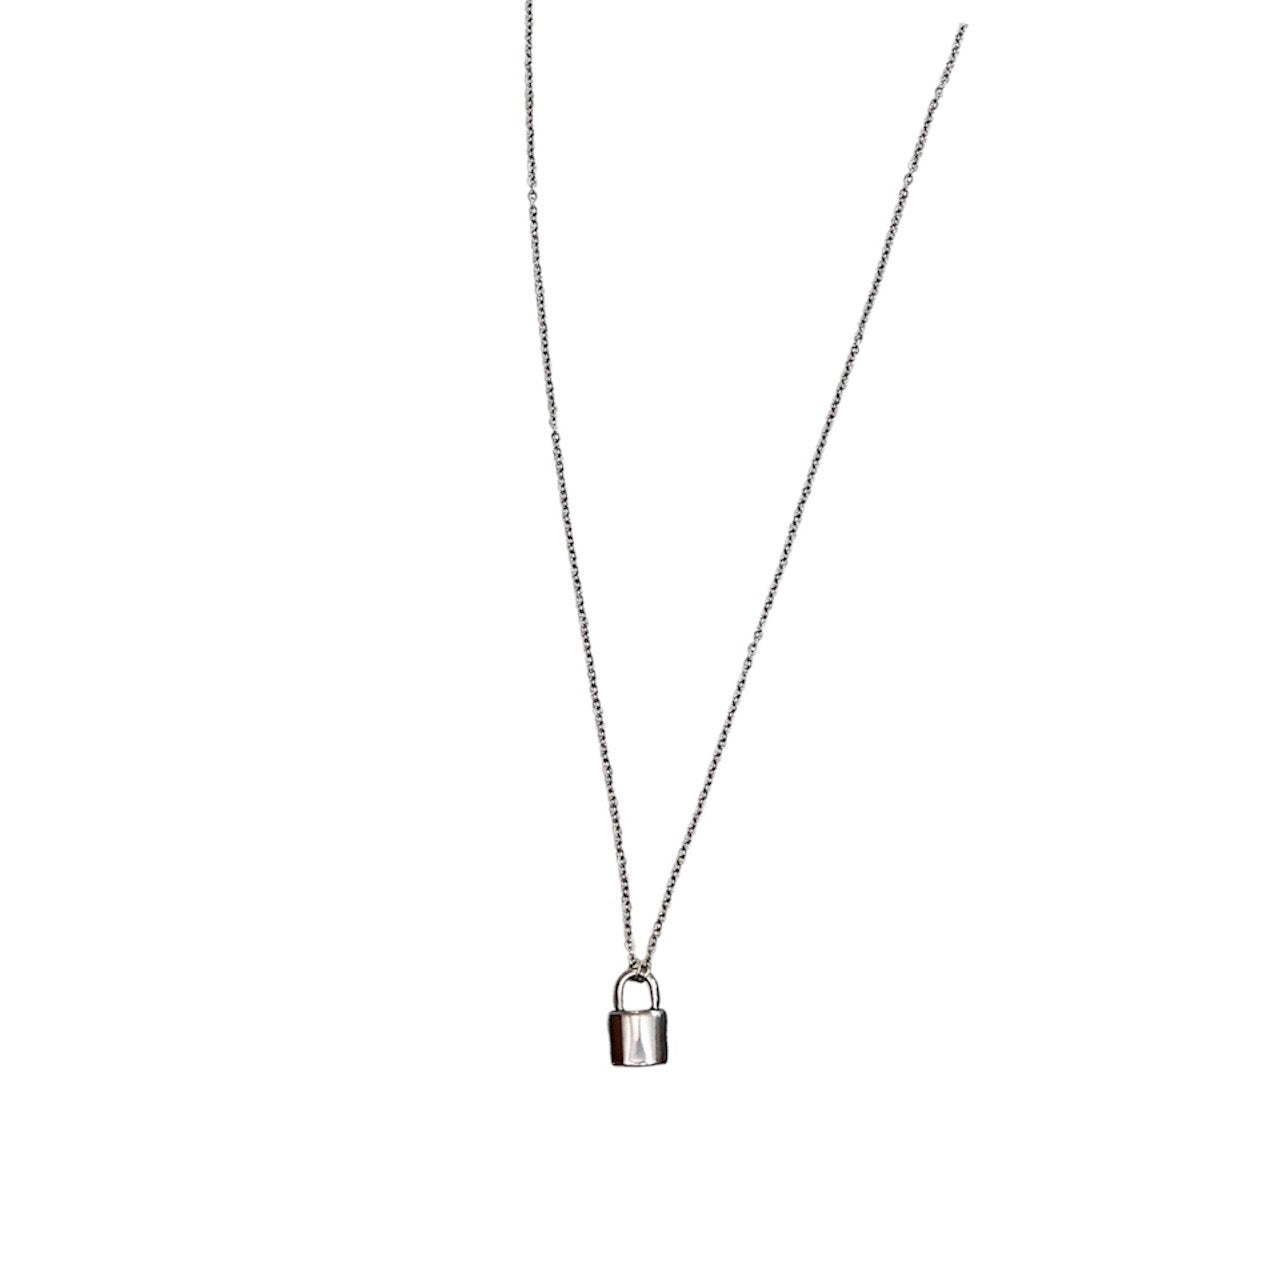 Silver  padlock charm necklace